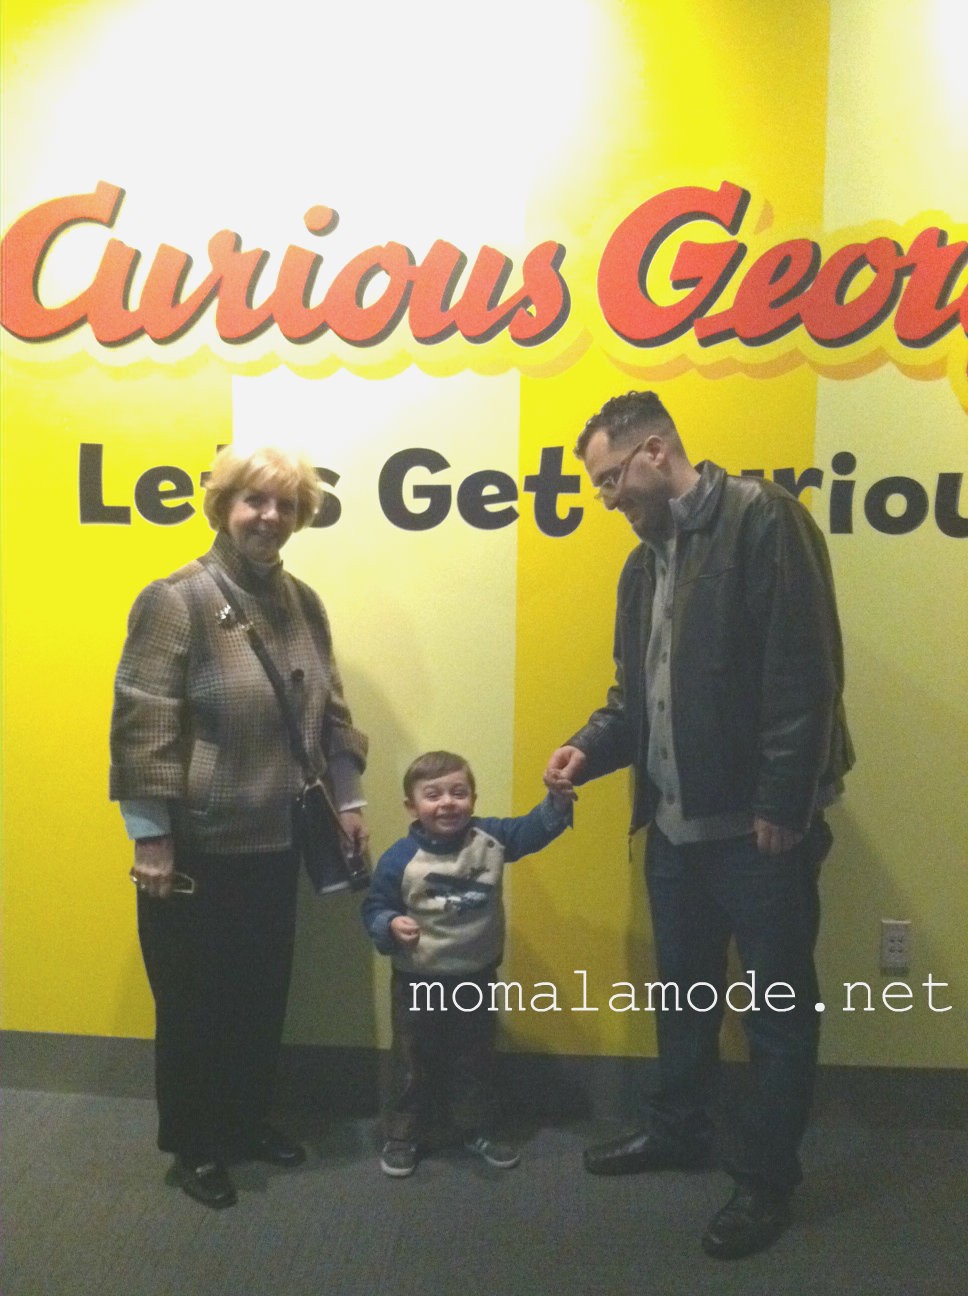 Nana, Roc & Daddy excited to see Curious George